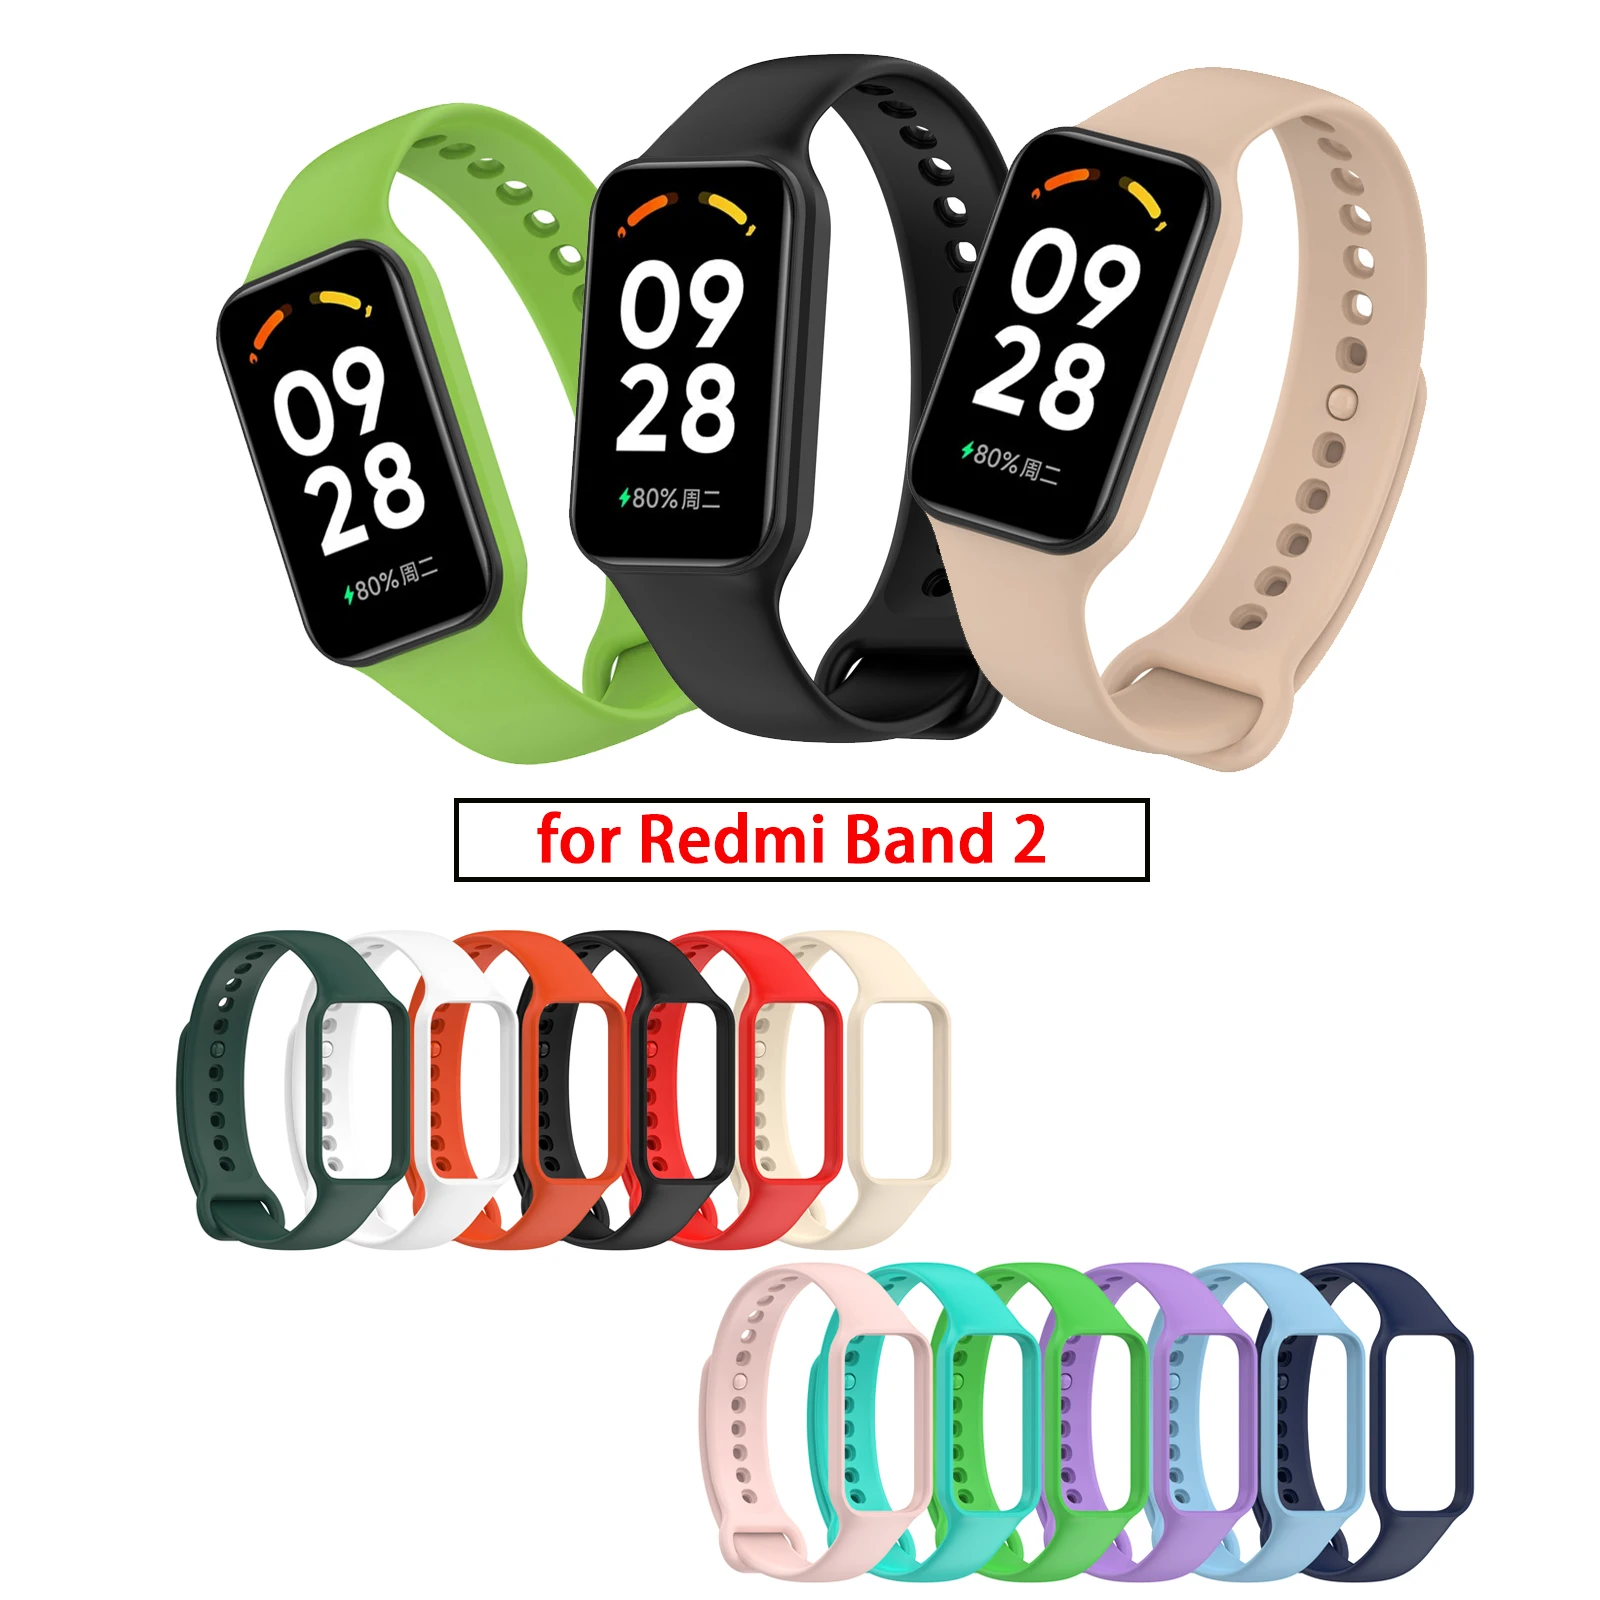 

Soft Silicone Watch Band Strap For Redmi Band 2 Smart Watch Replacement Sport Wristband Bracelet correas